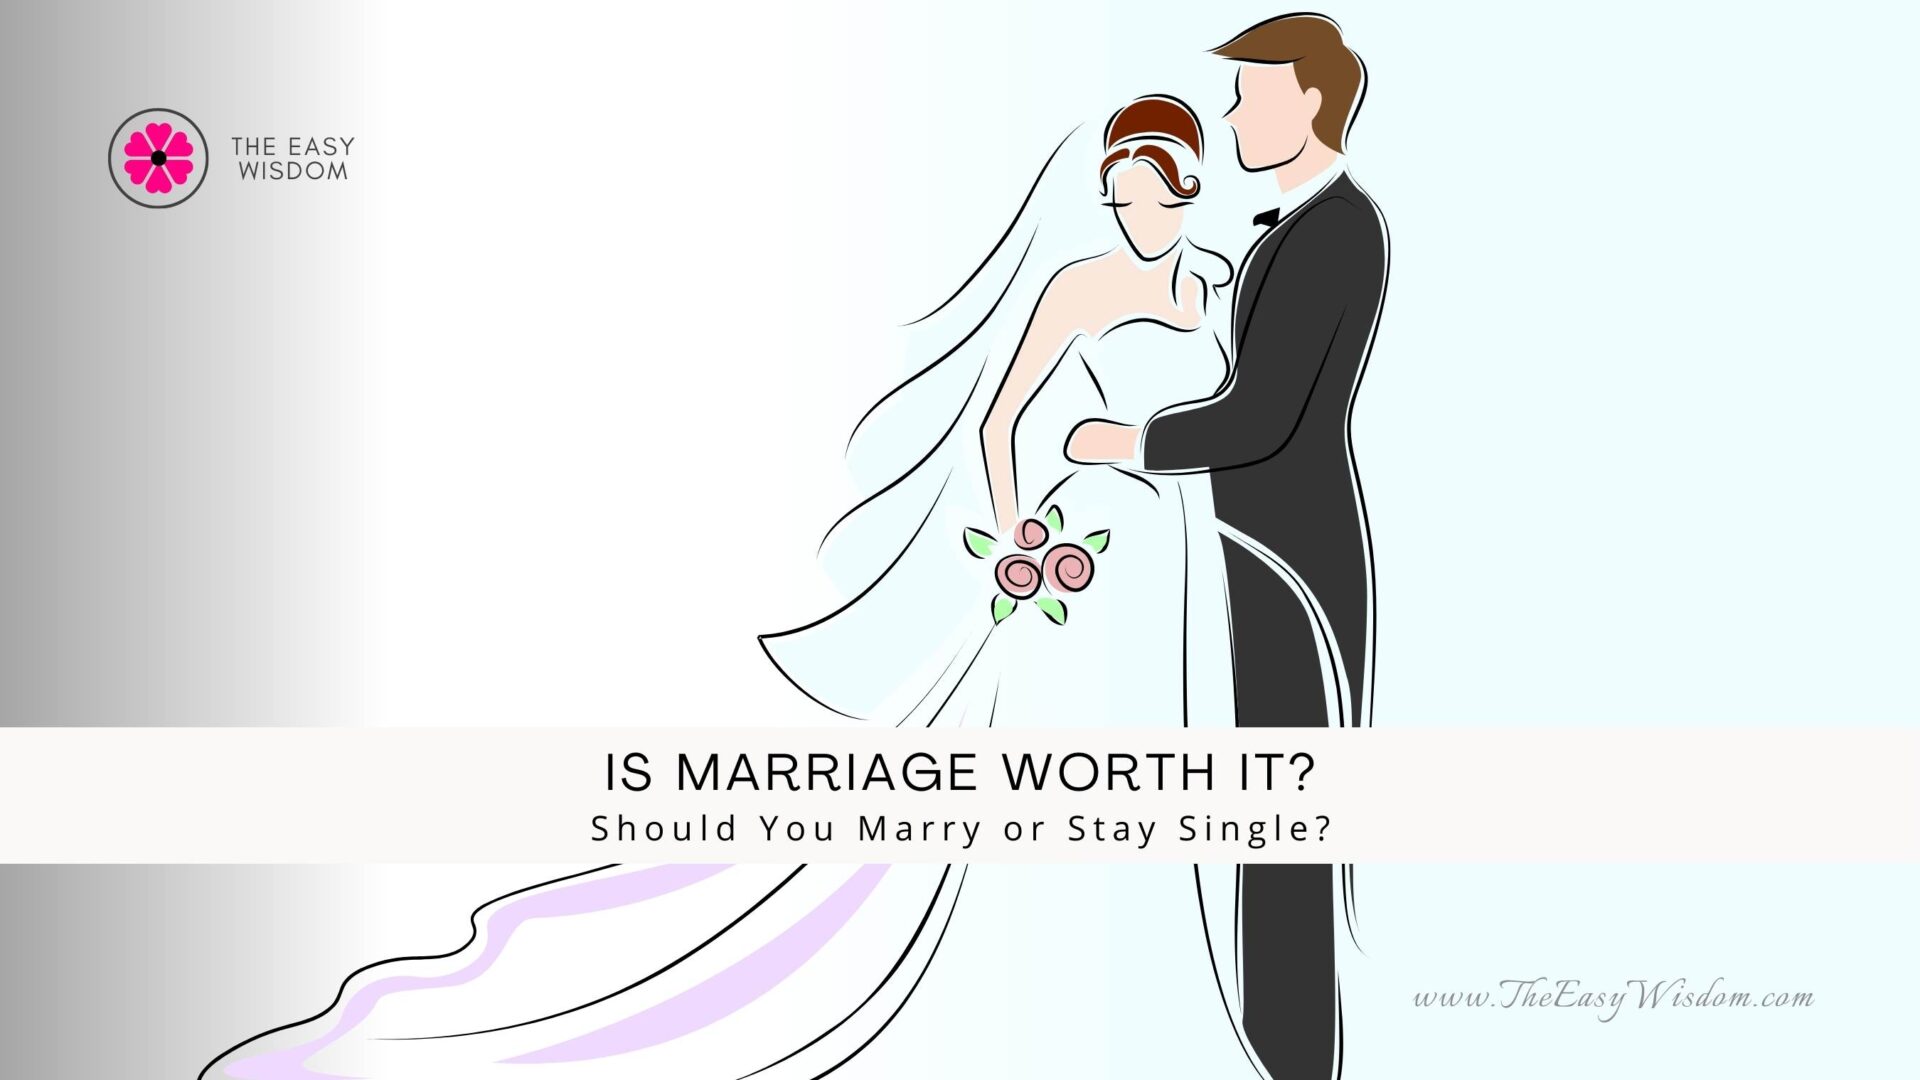 Is Marriage Worth It? Should You Stay Single or Get Married?